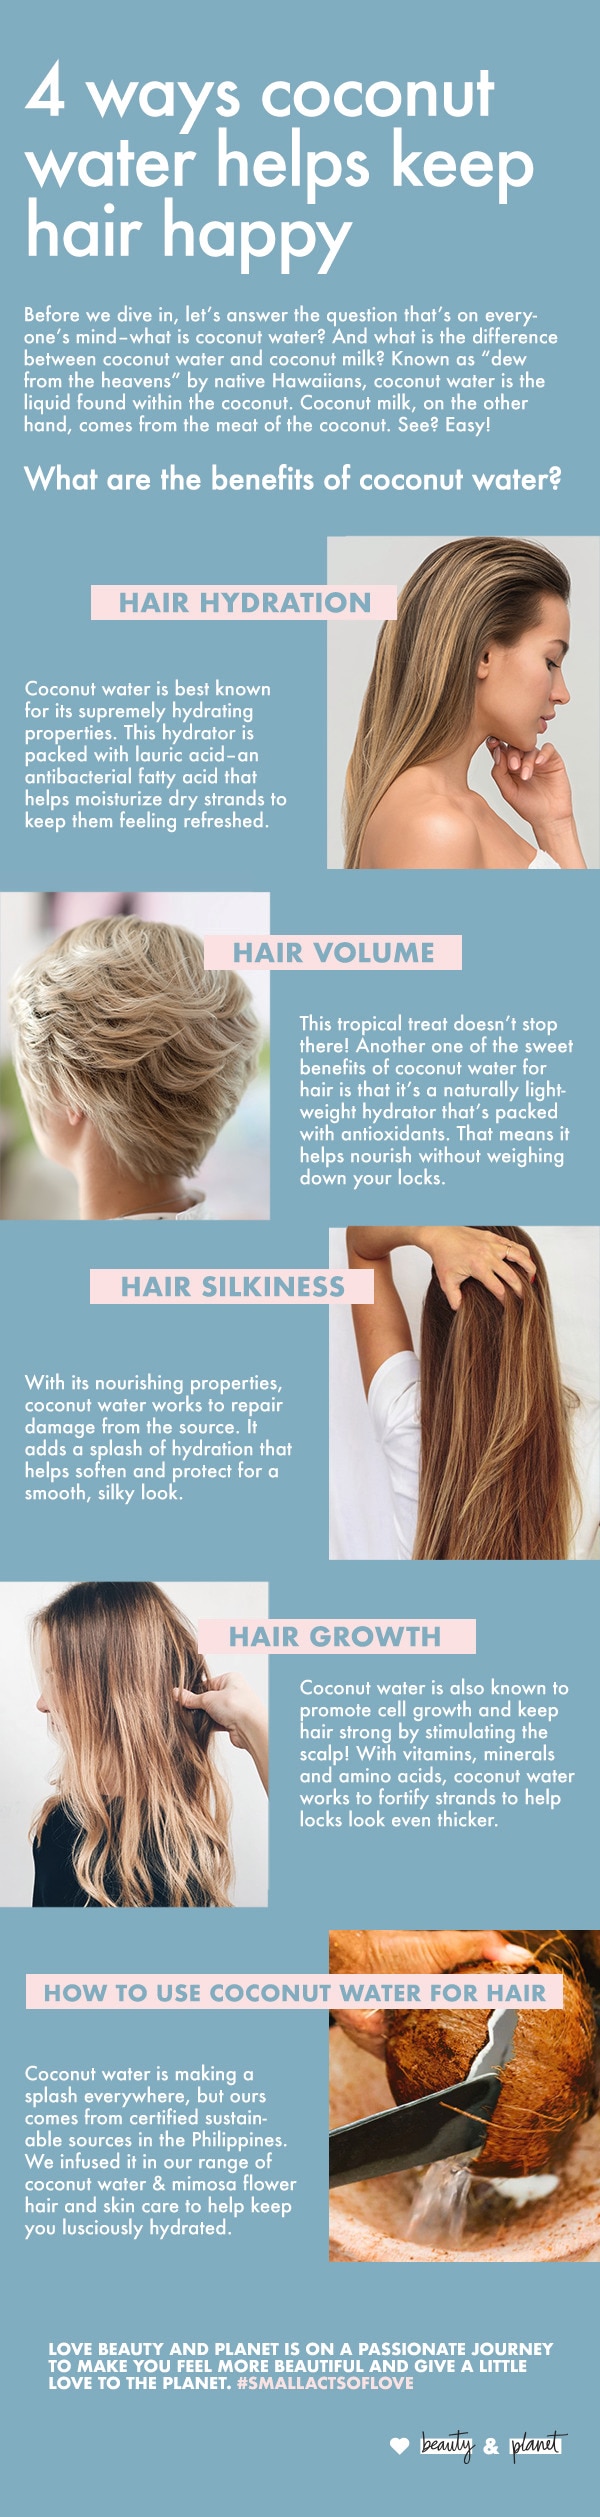 Benefits of coconut water for hair Infographic